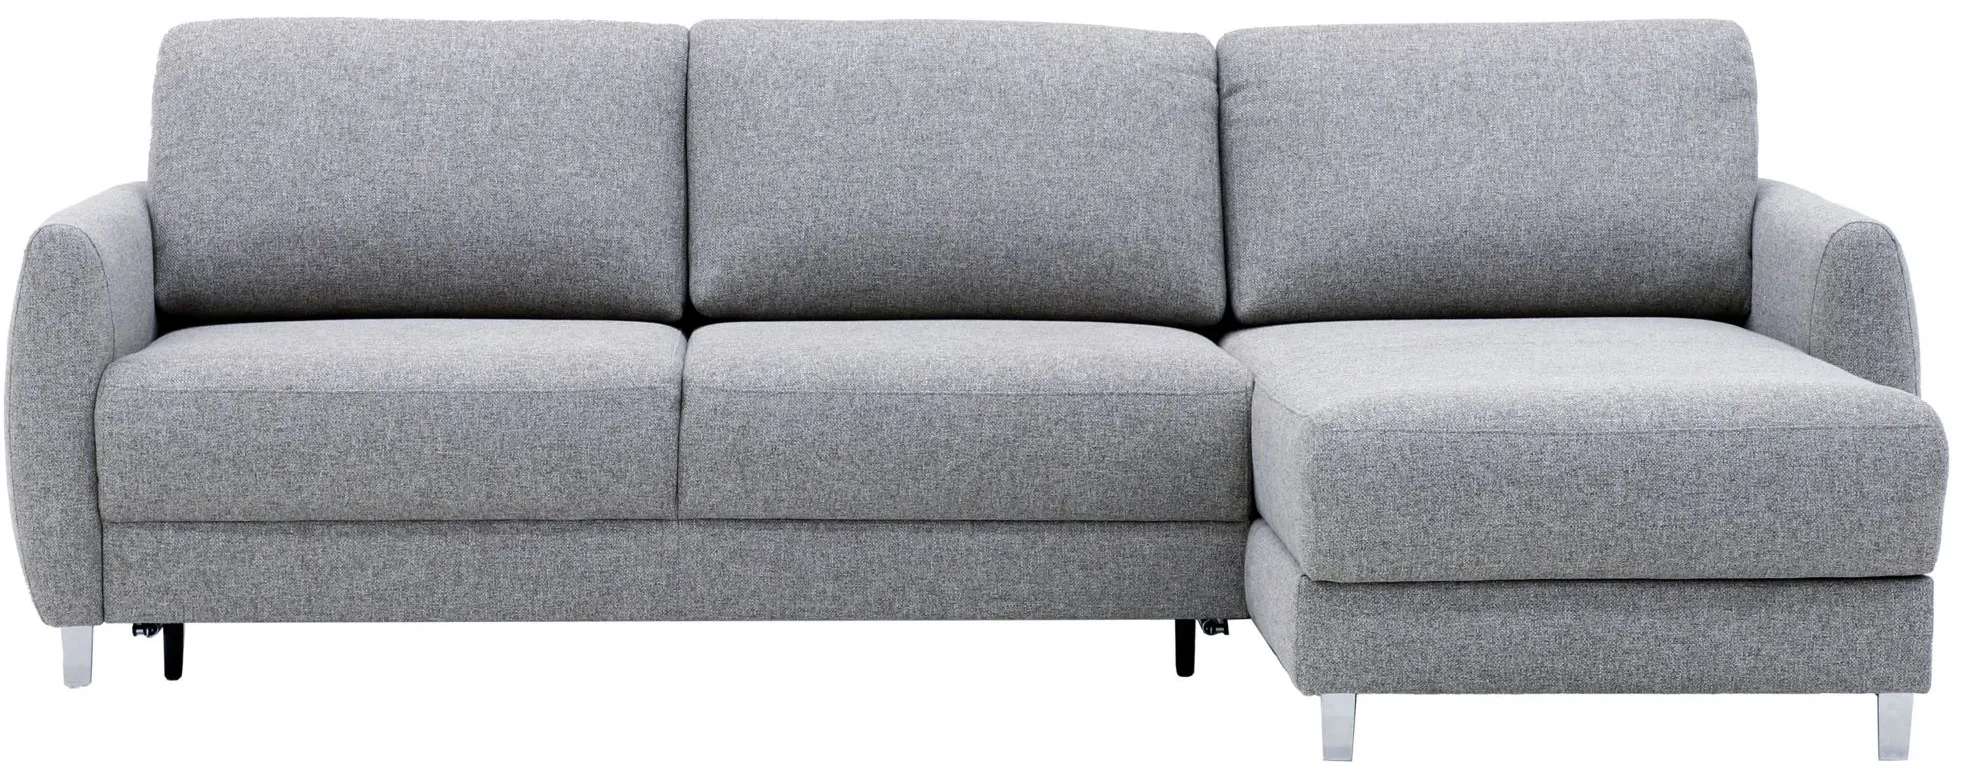 Delta Full XL Reversible Sectional Sleeper in Rene 03 by Luonto Furniture